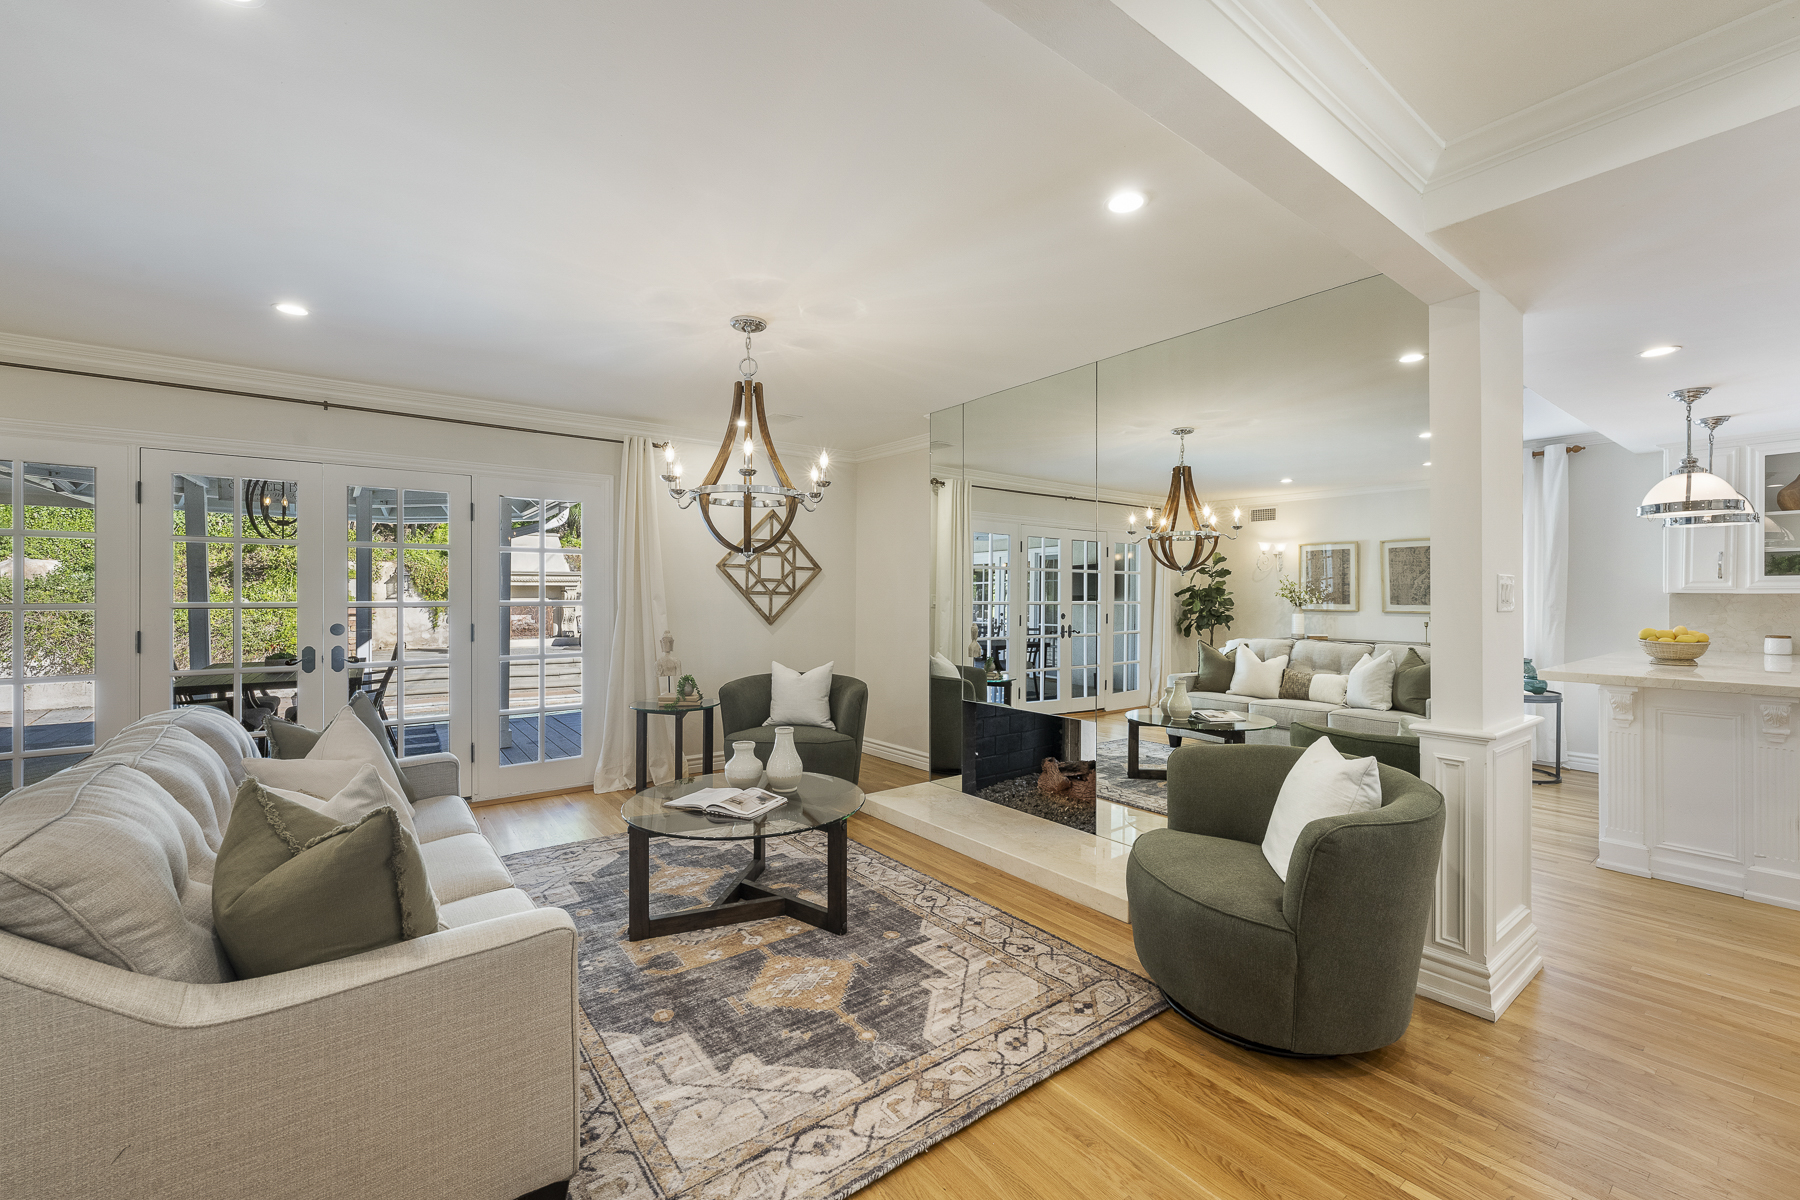 806 N. Adlena Drive, Fullerton, CA 92833: Interior shot of living room and french doors from entrance.